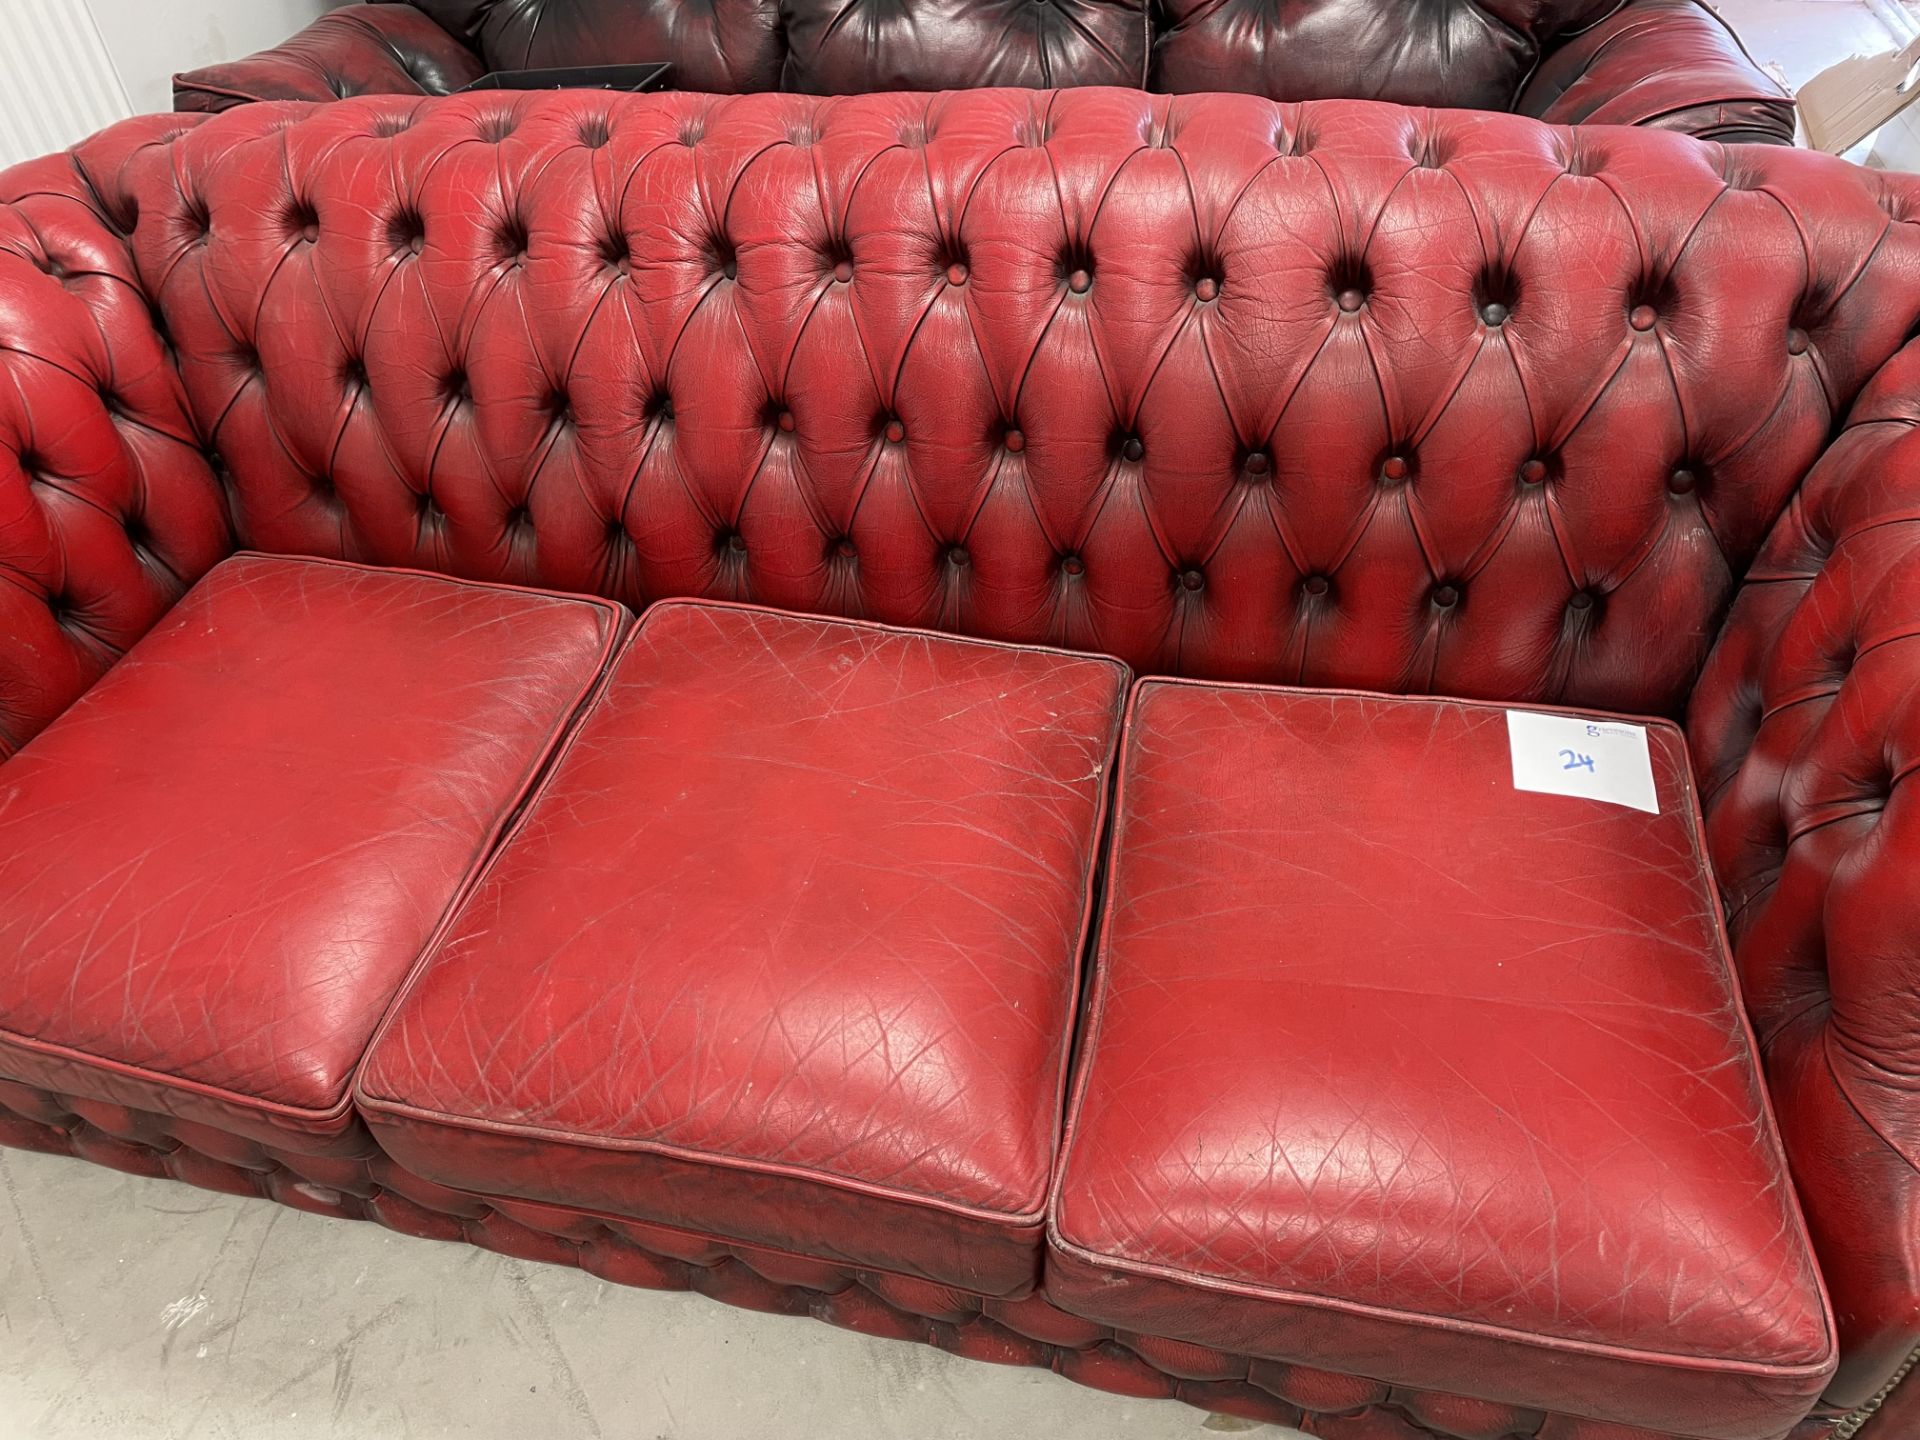 RED ANTIQUE LEATHER CHESTERFIELD (2000 x 950) - Image 3 of 3